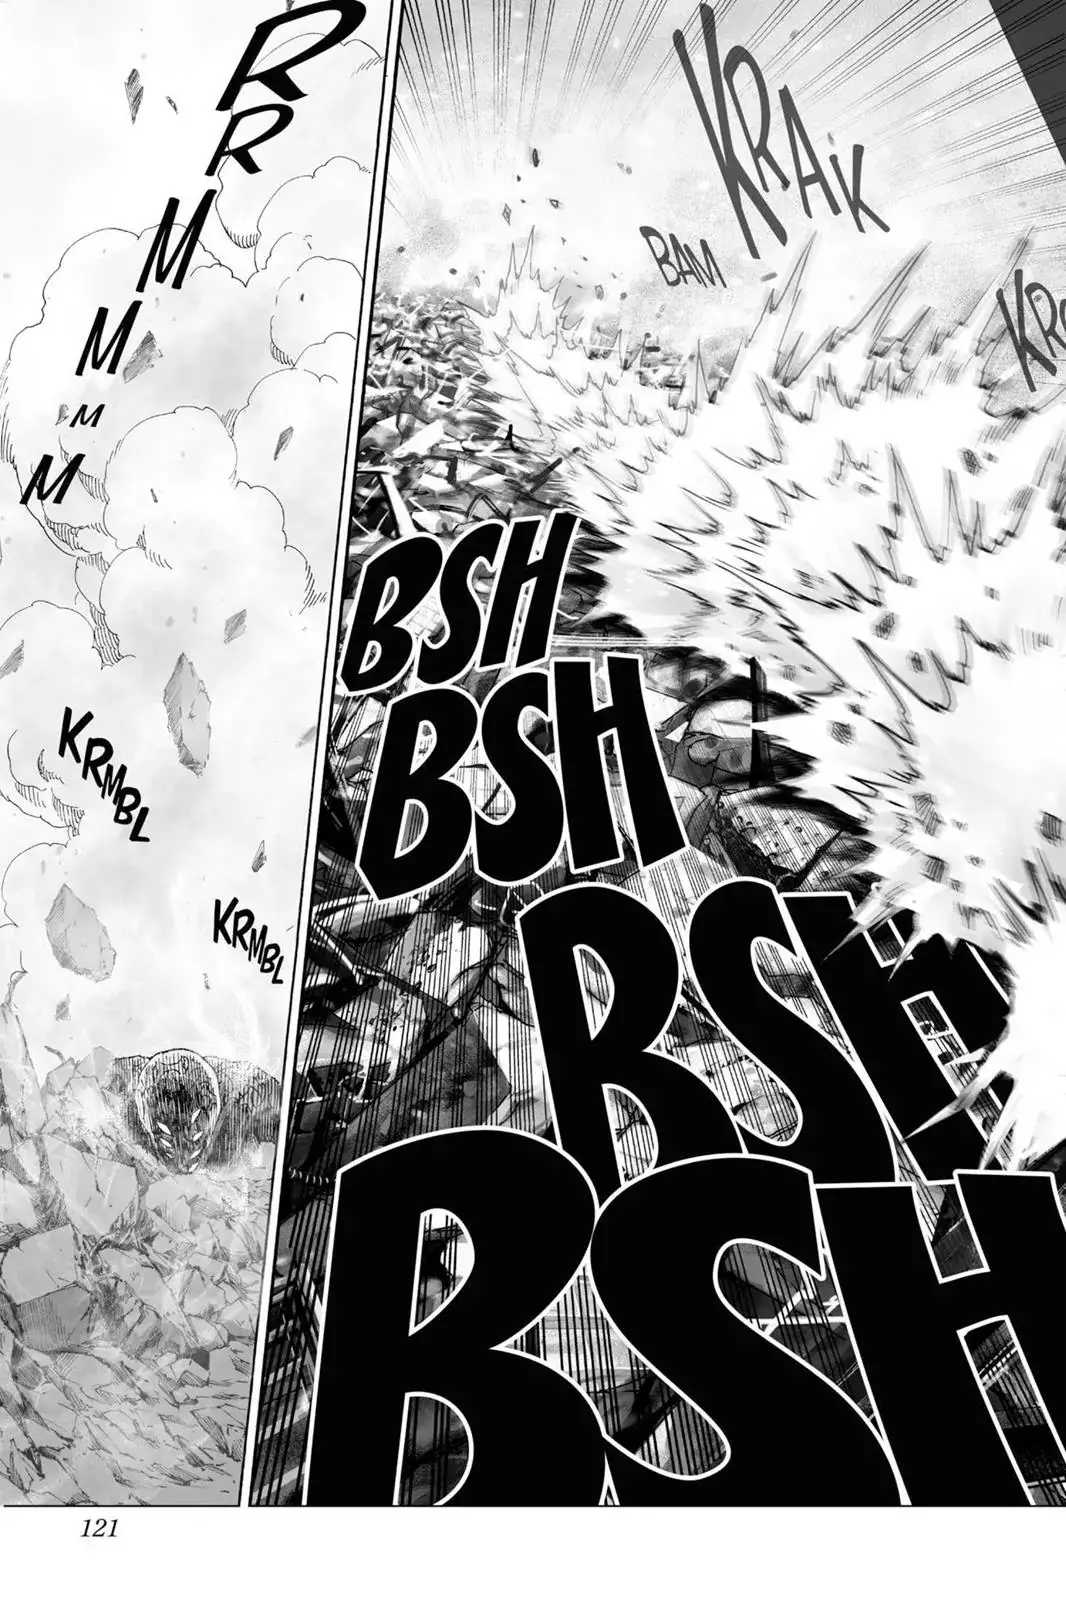 One Punch Man Chapter 32, READ One Punch Man Chapter 32 ONLINE, lost in the cloud genre,lost in the cloud gif,lost in the cloud girl,lost in the cloud goods,lost in the cloud goodreads,lost in the cloud,lost ark cloud gaming,lost odyssey cloud gaming,lost in the cloud fanart,lost in the cloud fanfic,lost in the cloud fandom,lost in the cloud first kiss,lost in the cloud font,lost in the cloud ending,lost in the cloud episode 97,lost in the cloud edit,lost in the cloud explained,lost in the cloud dog,lost in the cloud discord server,lost in the cloud desktop wallpaper,lost in the cloud drawing,can't find my cloud on network,lost in the cloud characters,lost in the cloud chapter 93 release date,lost in the cloud birthday,lost in the cloud birthday art,lost in the cloud background,lost in the cloud banner,lost in the clouds meaning,what is the black cloud in lost,lost in the cloud ao3,lost in the cloud anime,lost in the cloud art,lost in the cloud author twitter,lost in the cloud author instagram,lost in the cloud artist,lost in the cloud acrylic stand,lost in the cloud artist twitter,lost in the cloud art style,lost in the cloud analysis